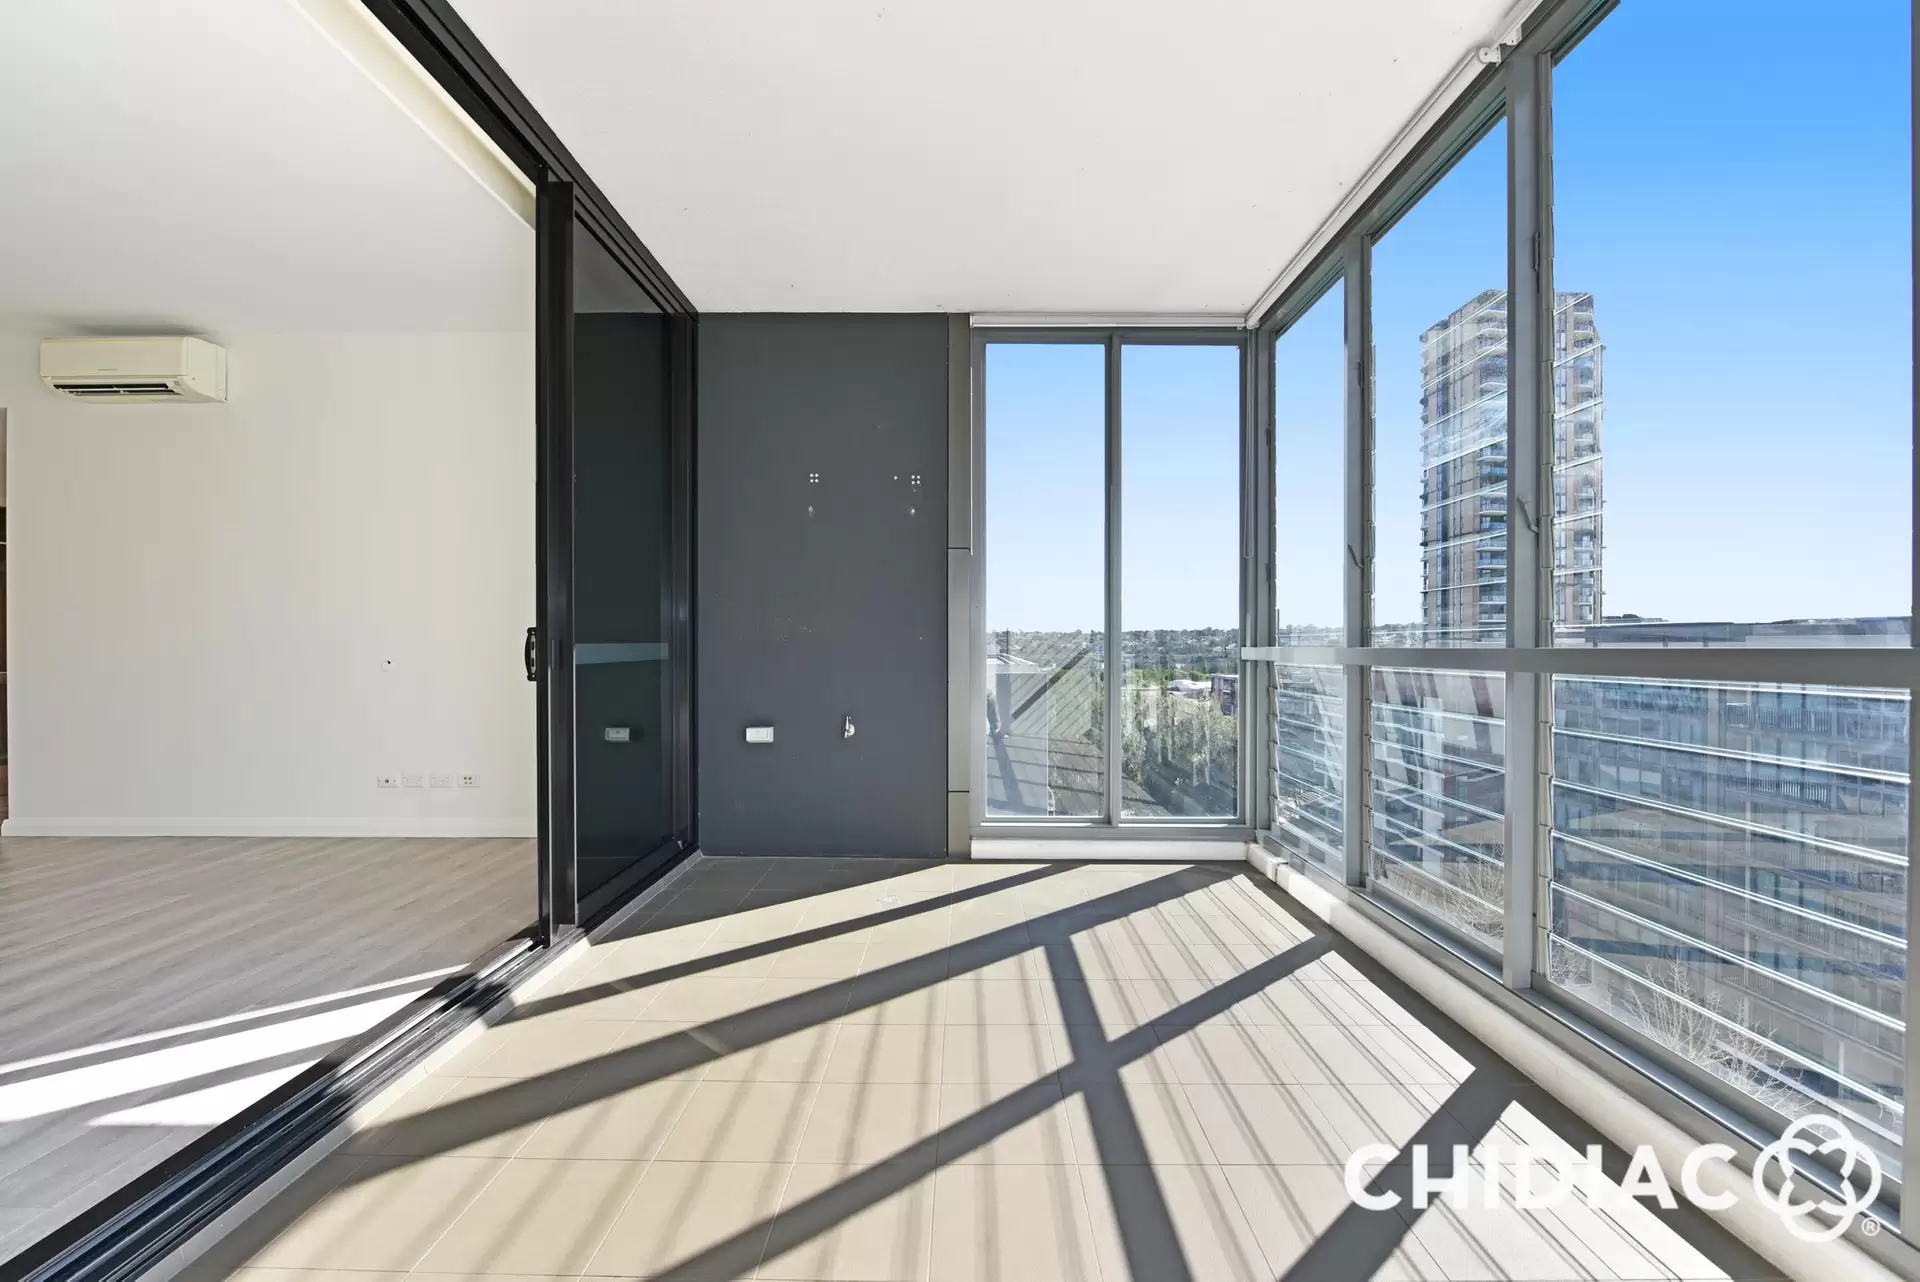 1003/3 Waterways Street, Wentworth Point Leased by Chidiac Realty - image 1